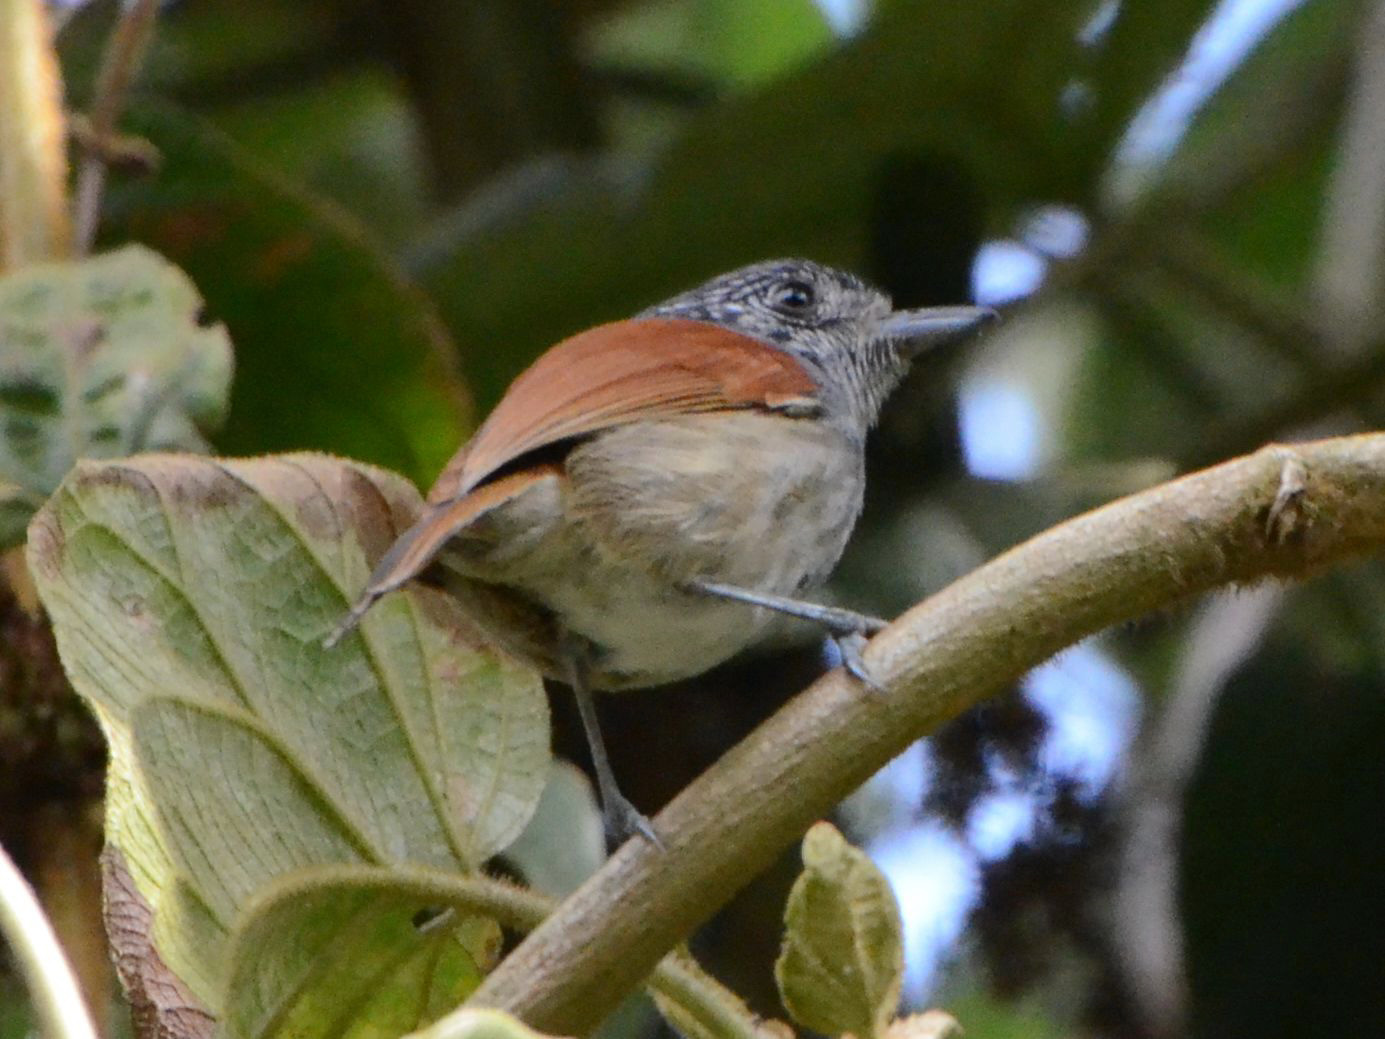 Click picture to see more Rufous-backed Antvireos.